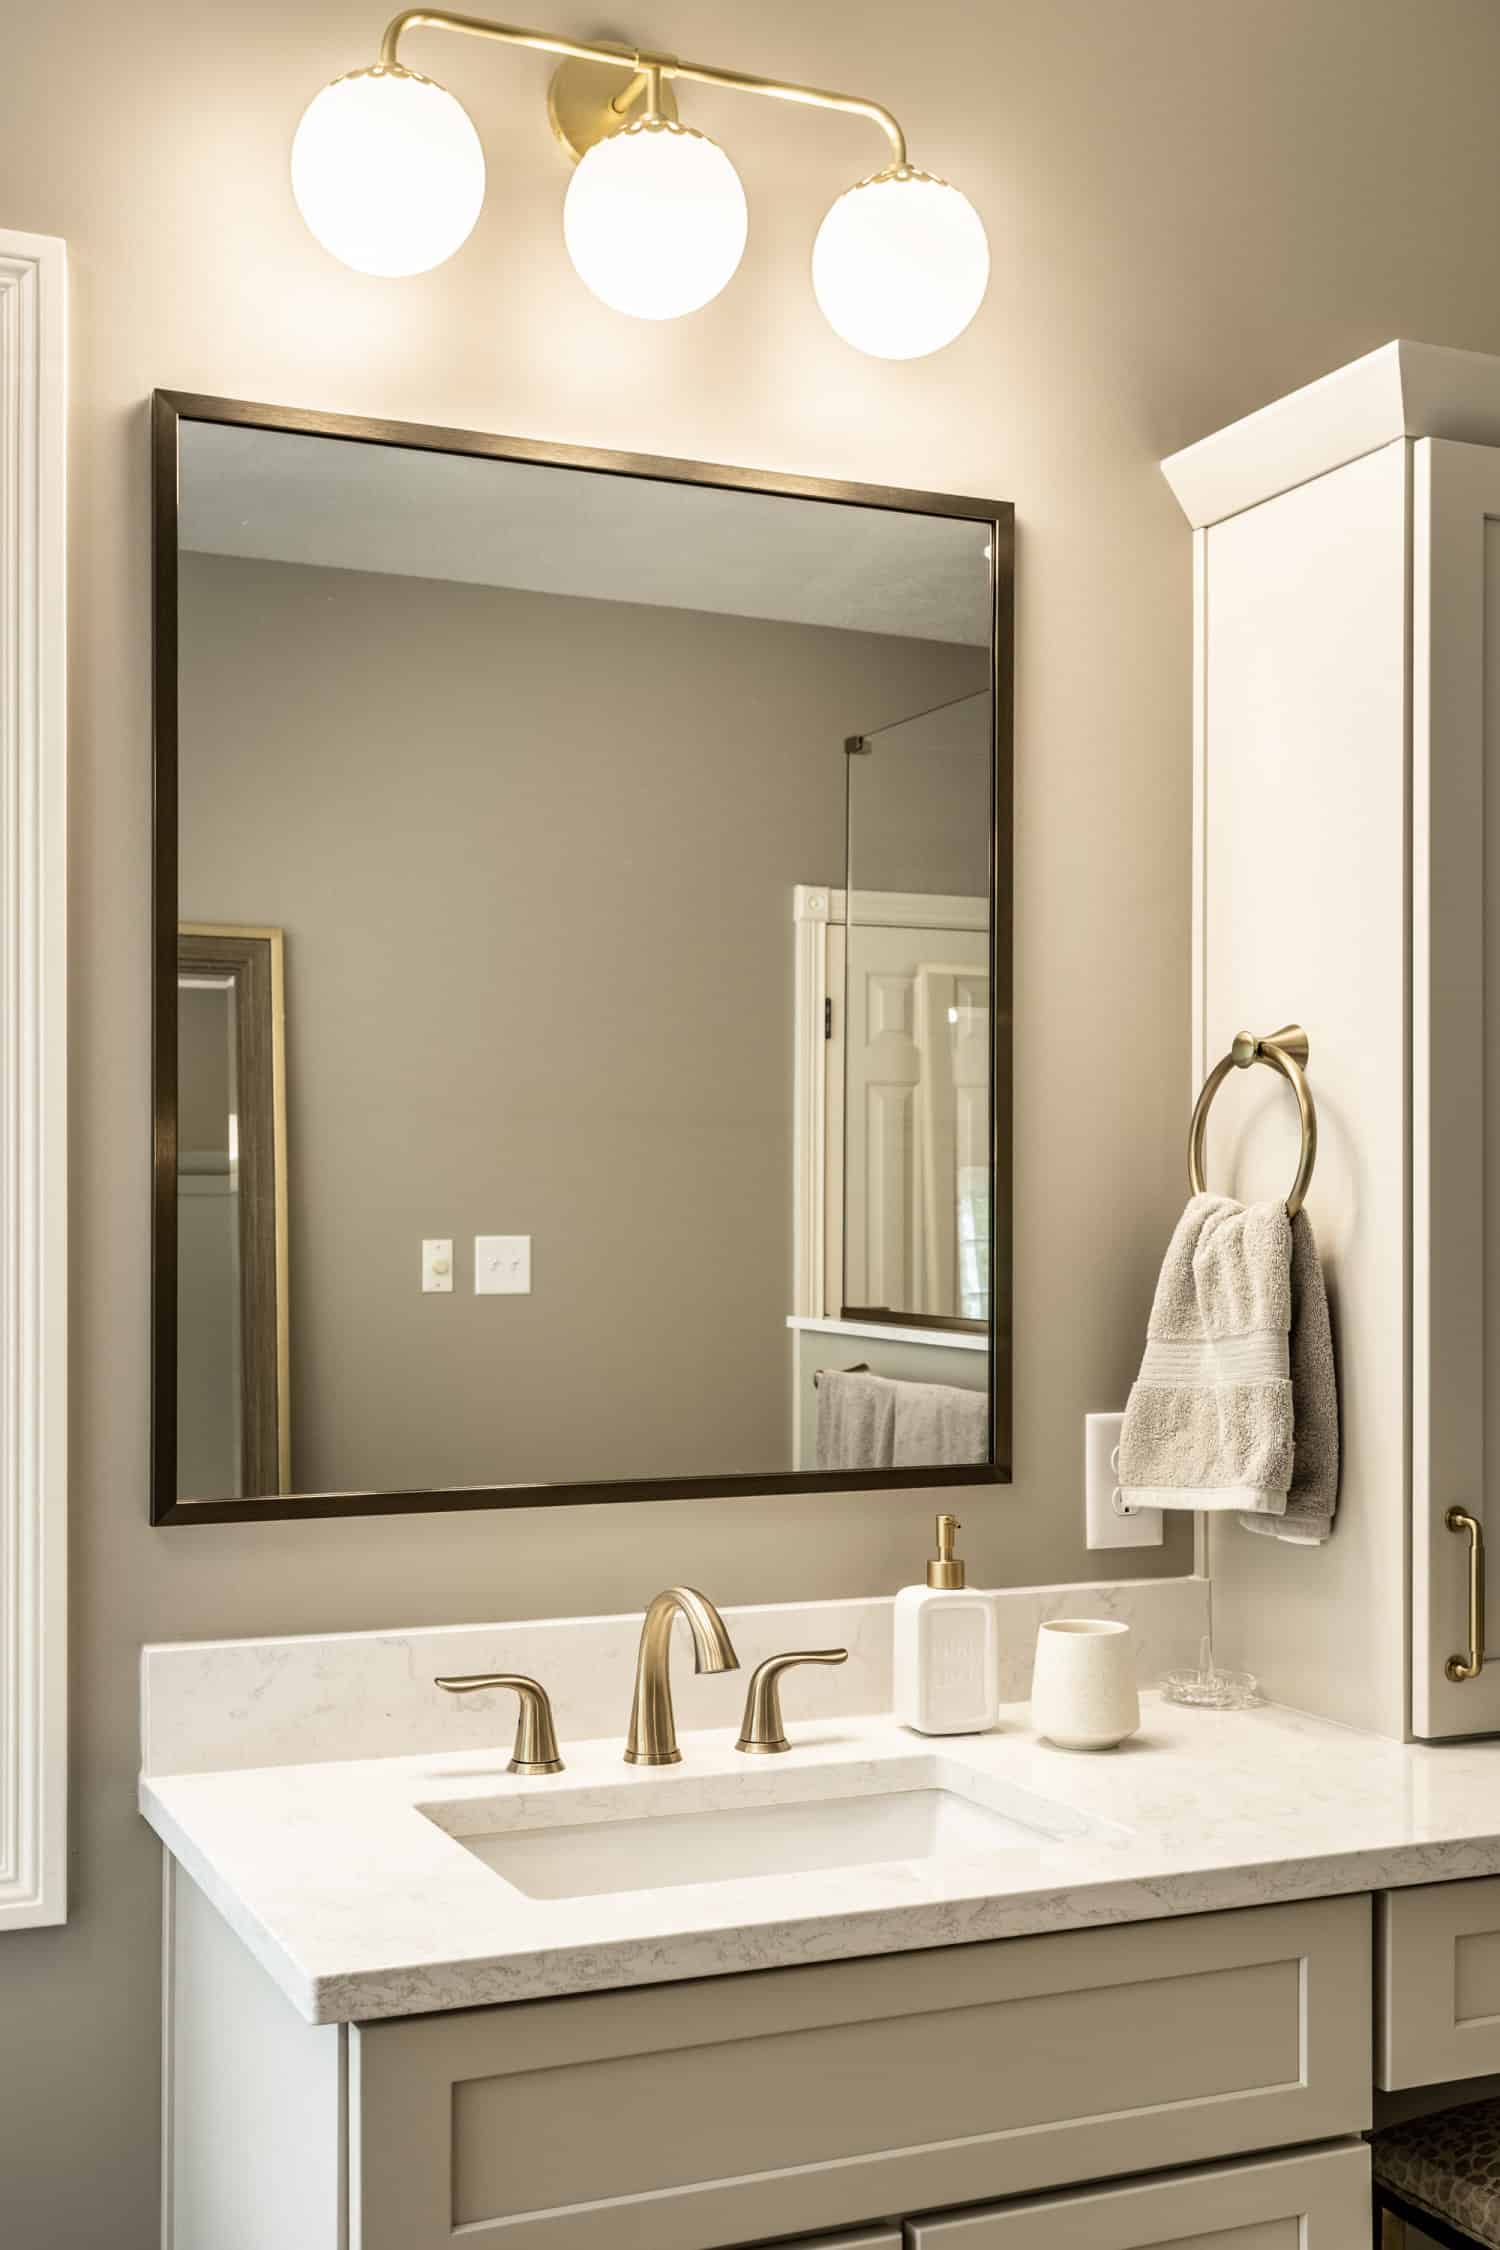 Nicholas Design Build | A modern bathroom with two sinks and a brushed gold mirror.